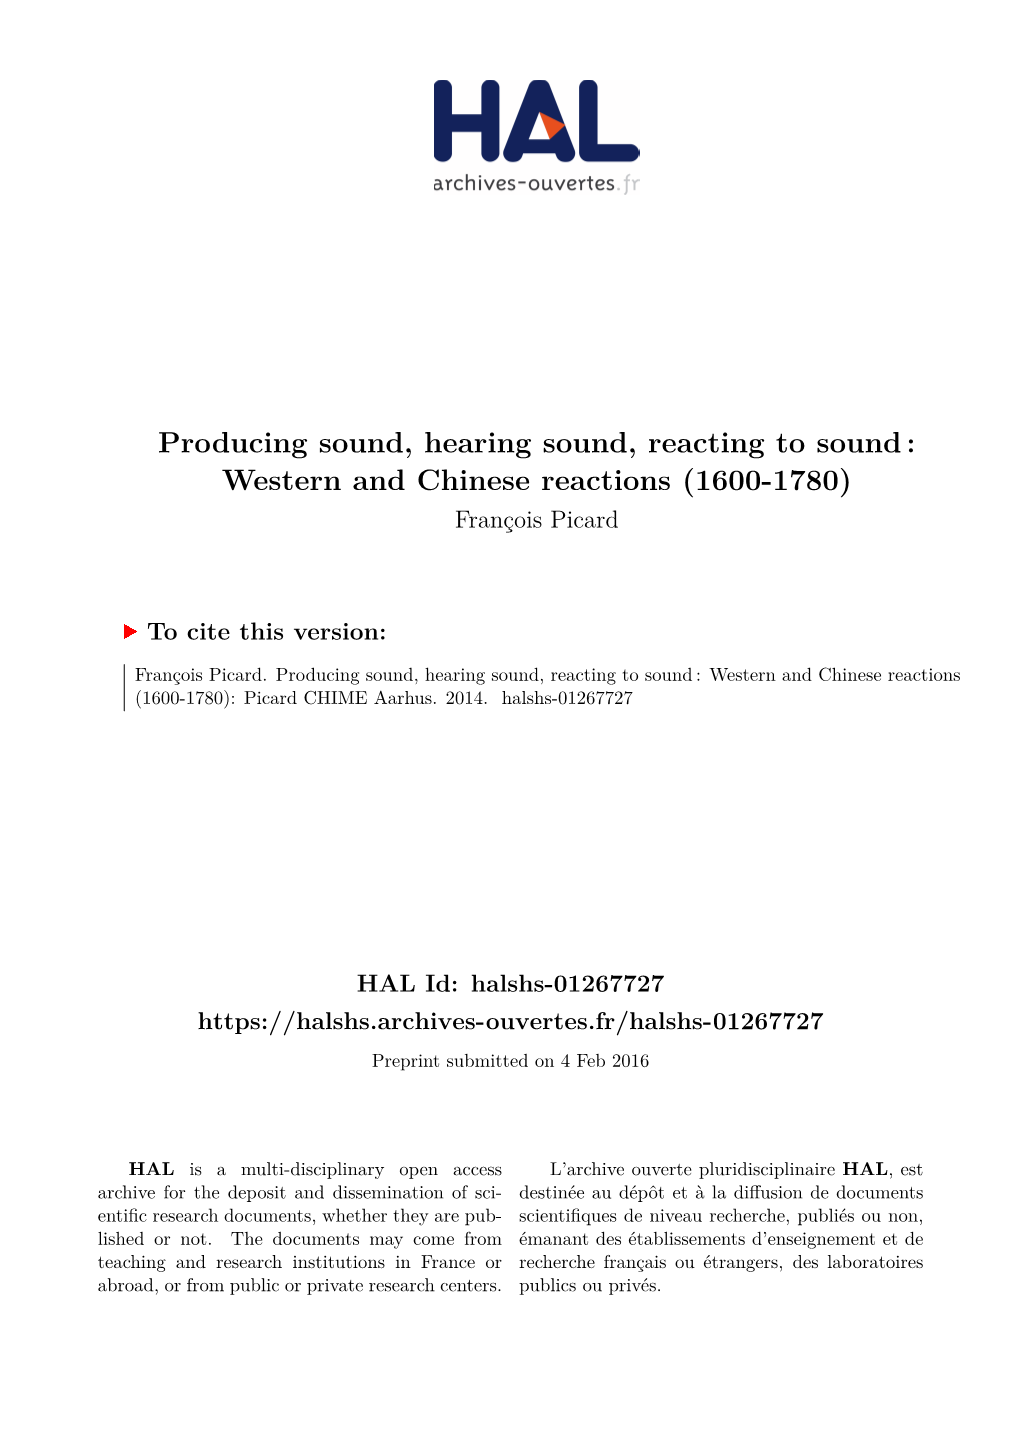 Producing Sound, Hearing Sound, Reacting to Sound : Western and Chinese Reactions (1600-1780) François Picard